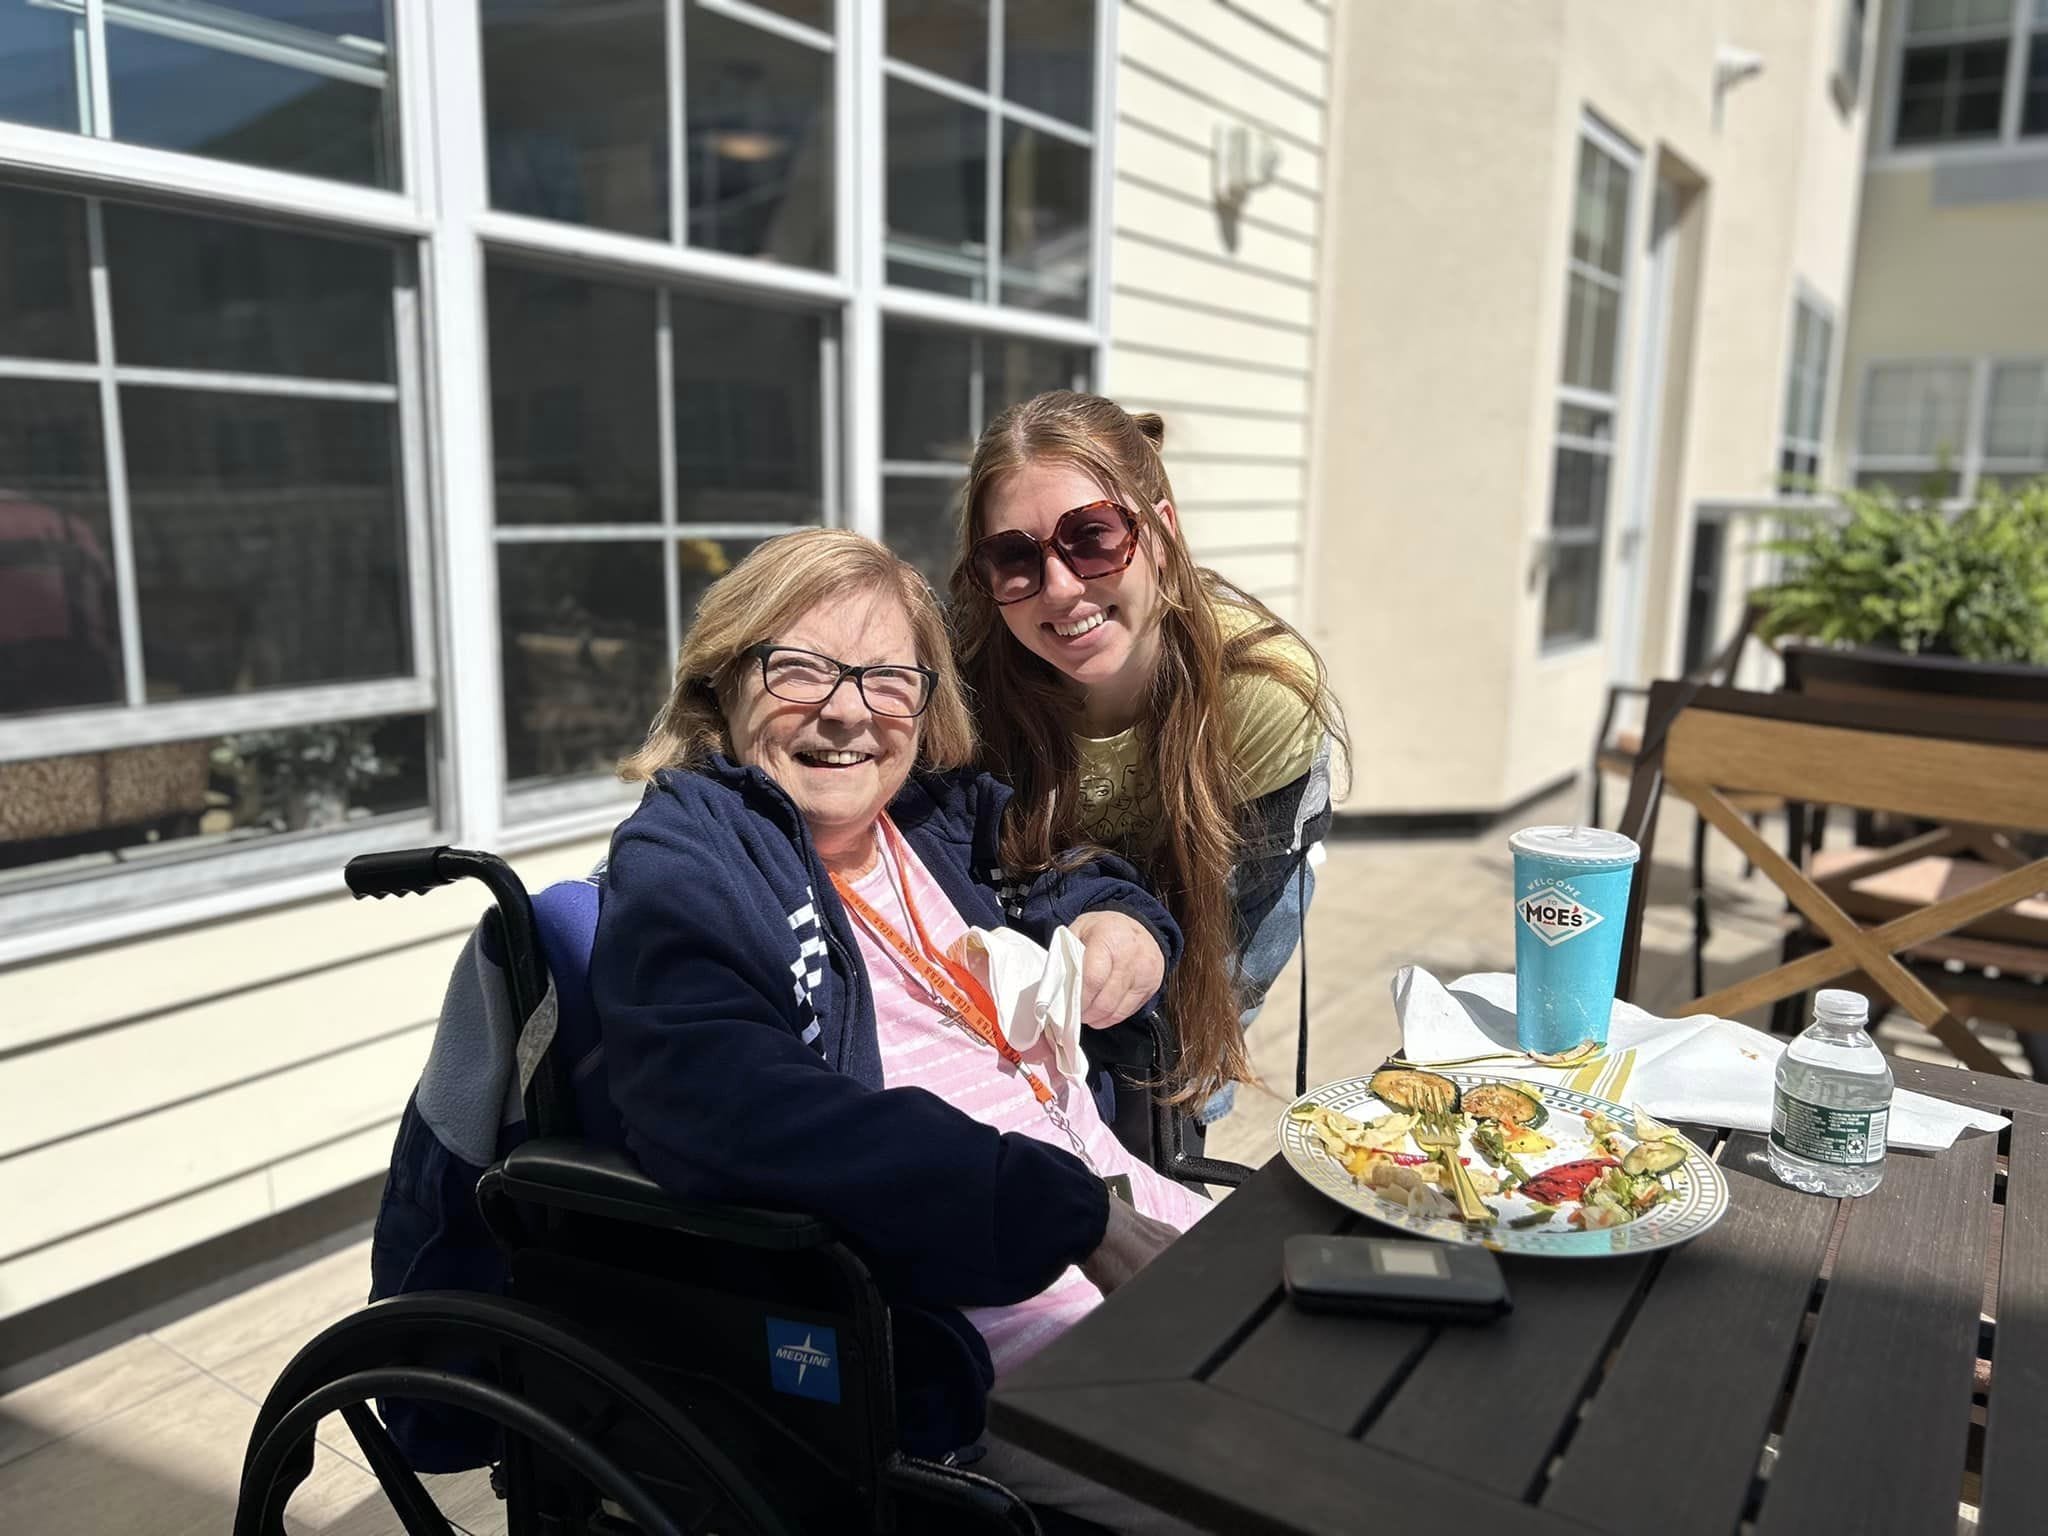 A young lady and a woman in a wheelchair smiling over a plate of food